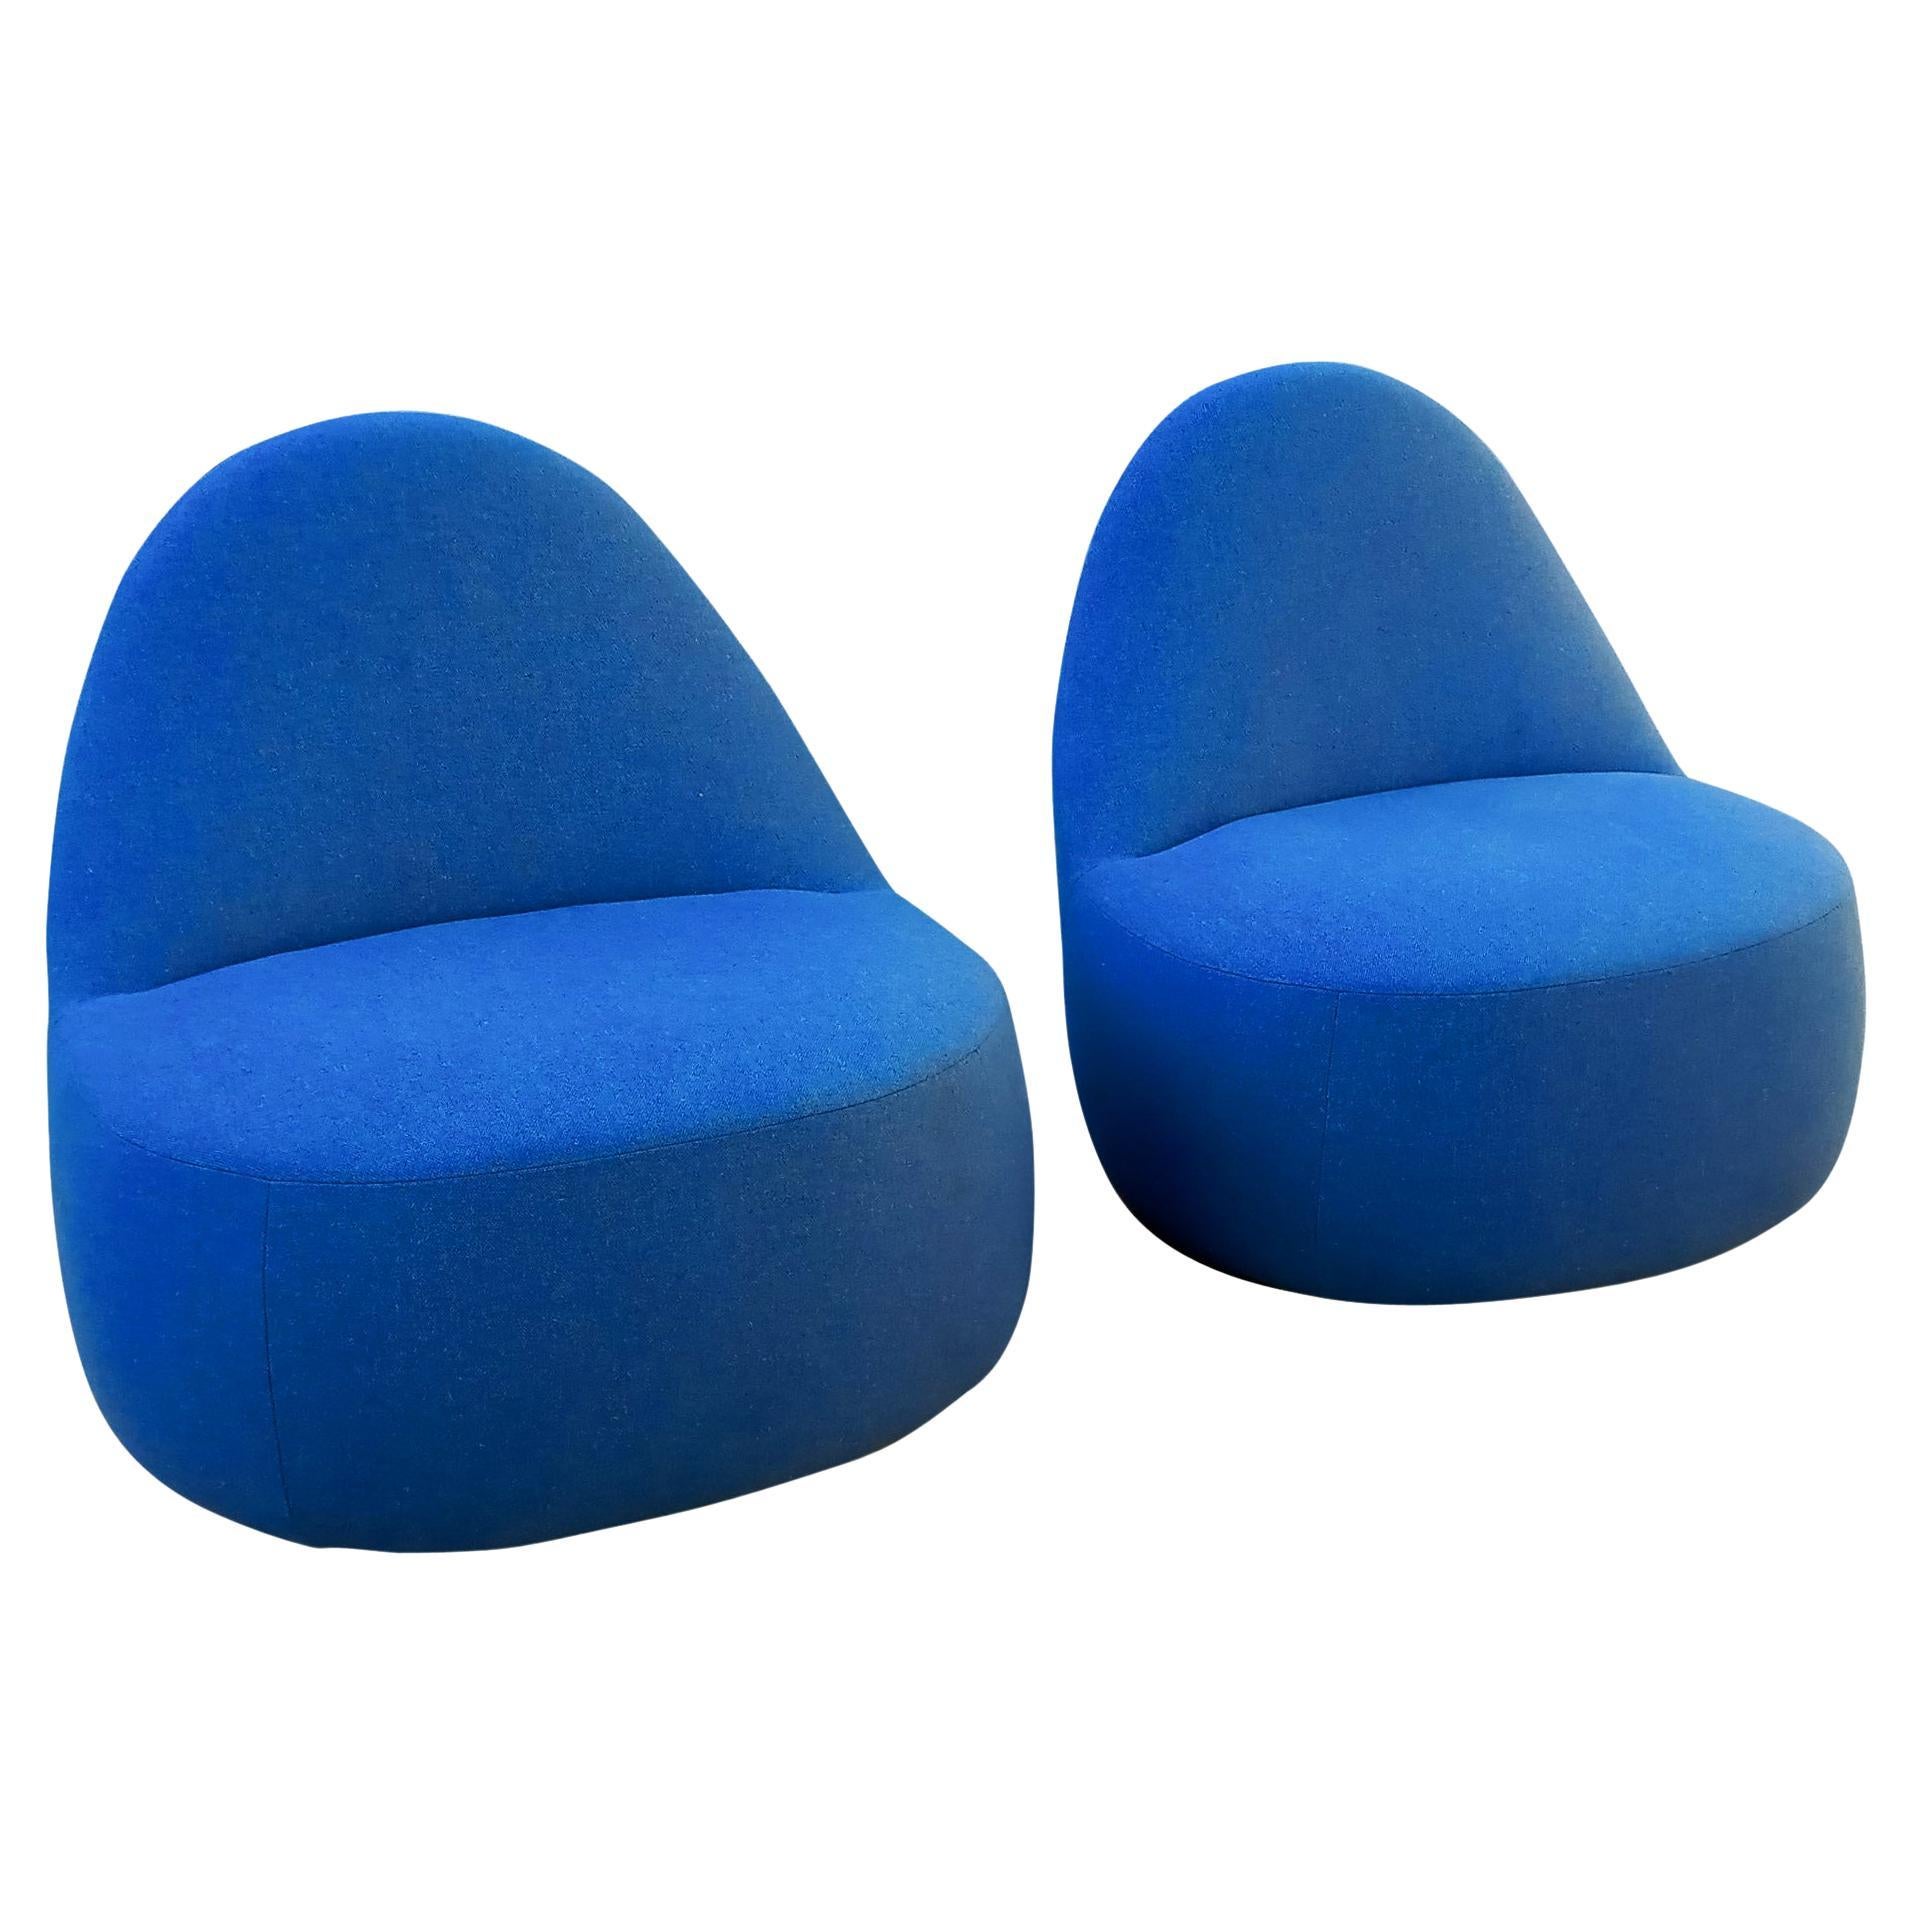 This pair of elegant and space-age chairs was designed by Claudia and Harry Washington for production by Bernhardt Design. They are dressed in a rich blue color, and feature a strap on the back for increased handleability. The strap runs down the